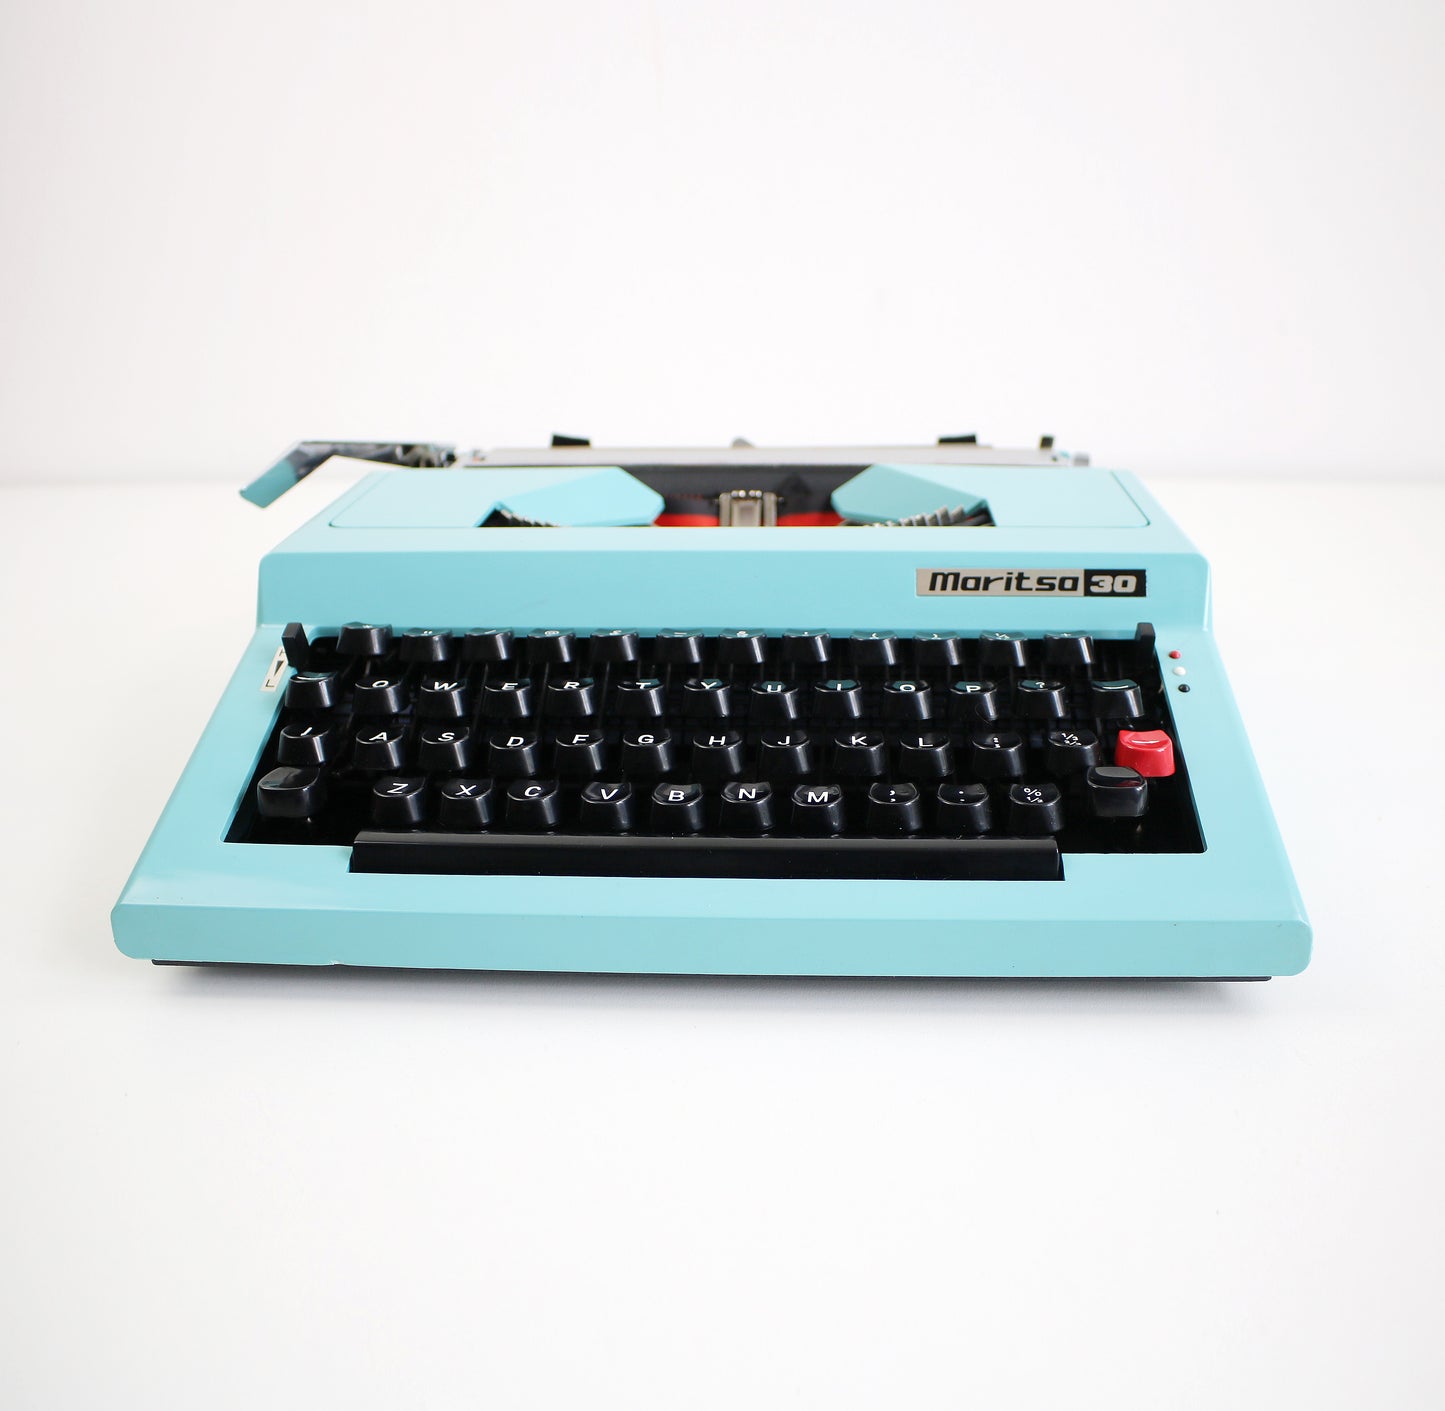 Modernist Maritsa 30 typewriter with cover - blue and black - working conditon